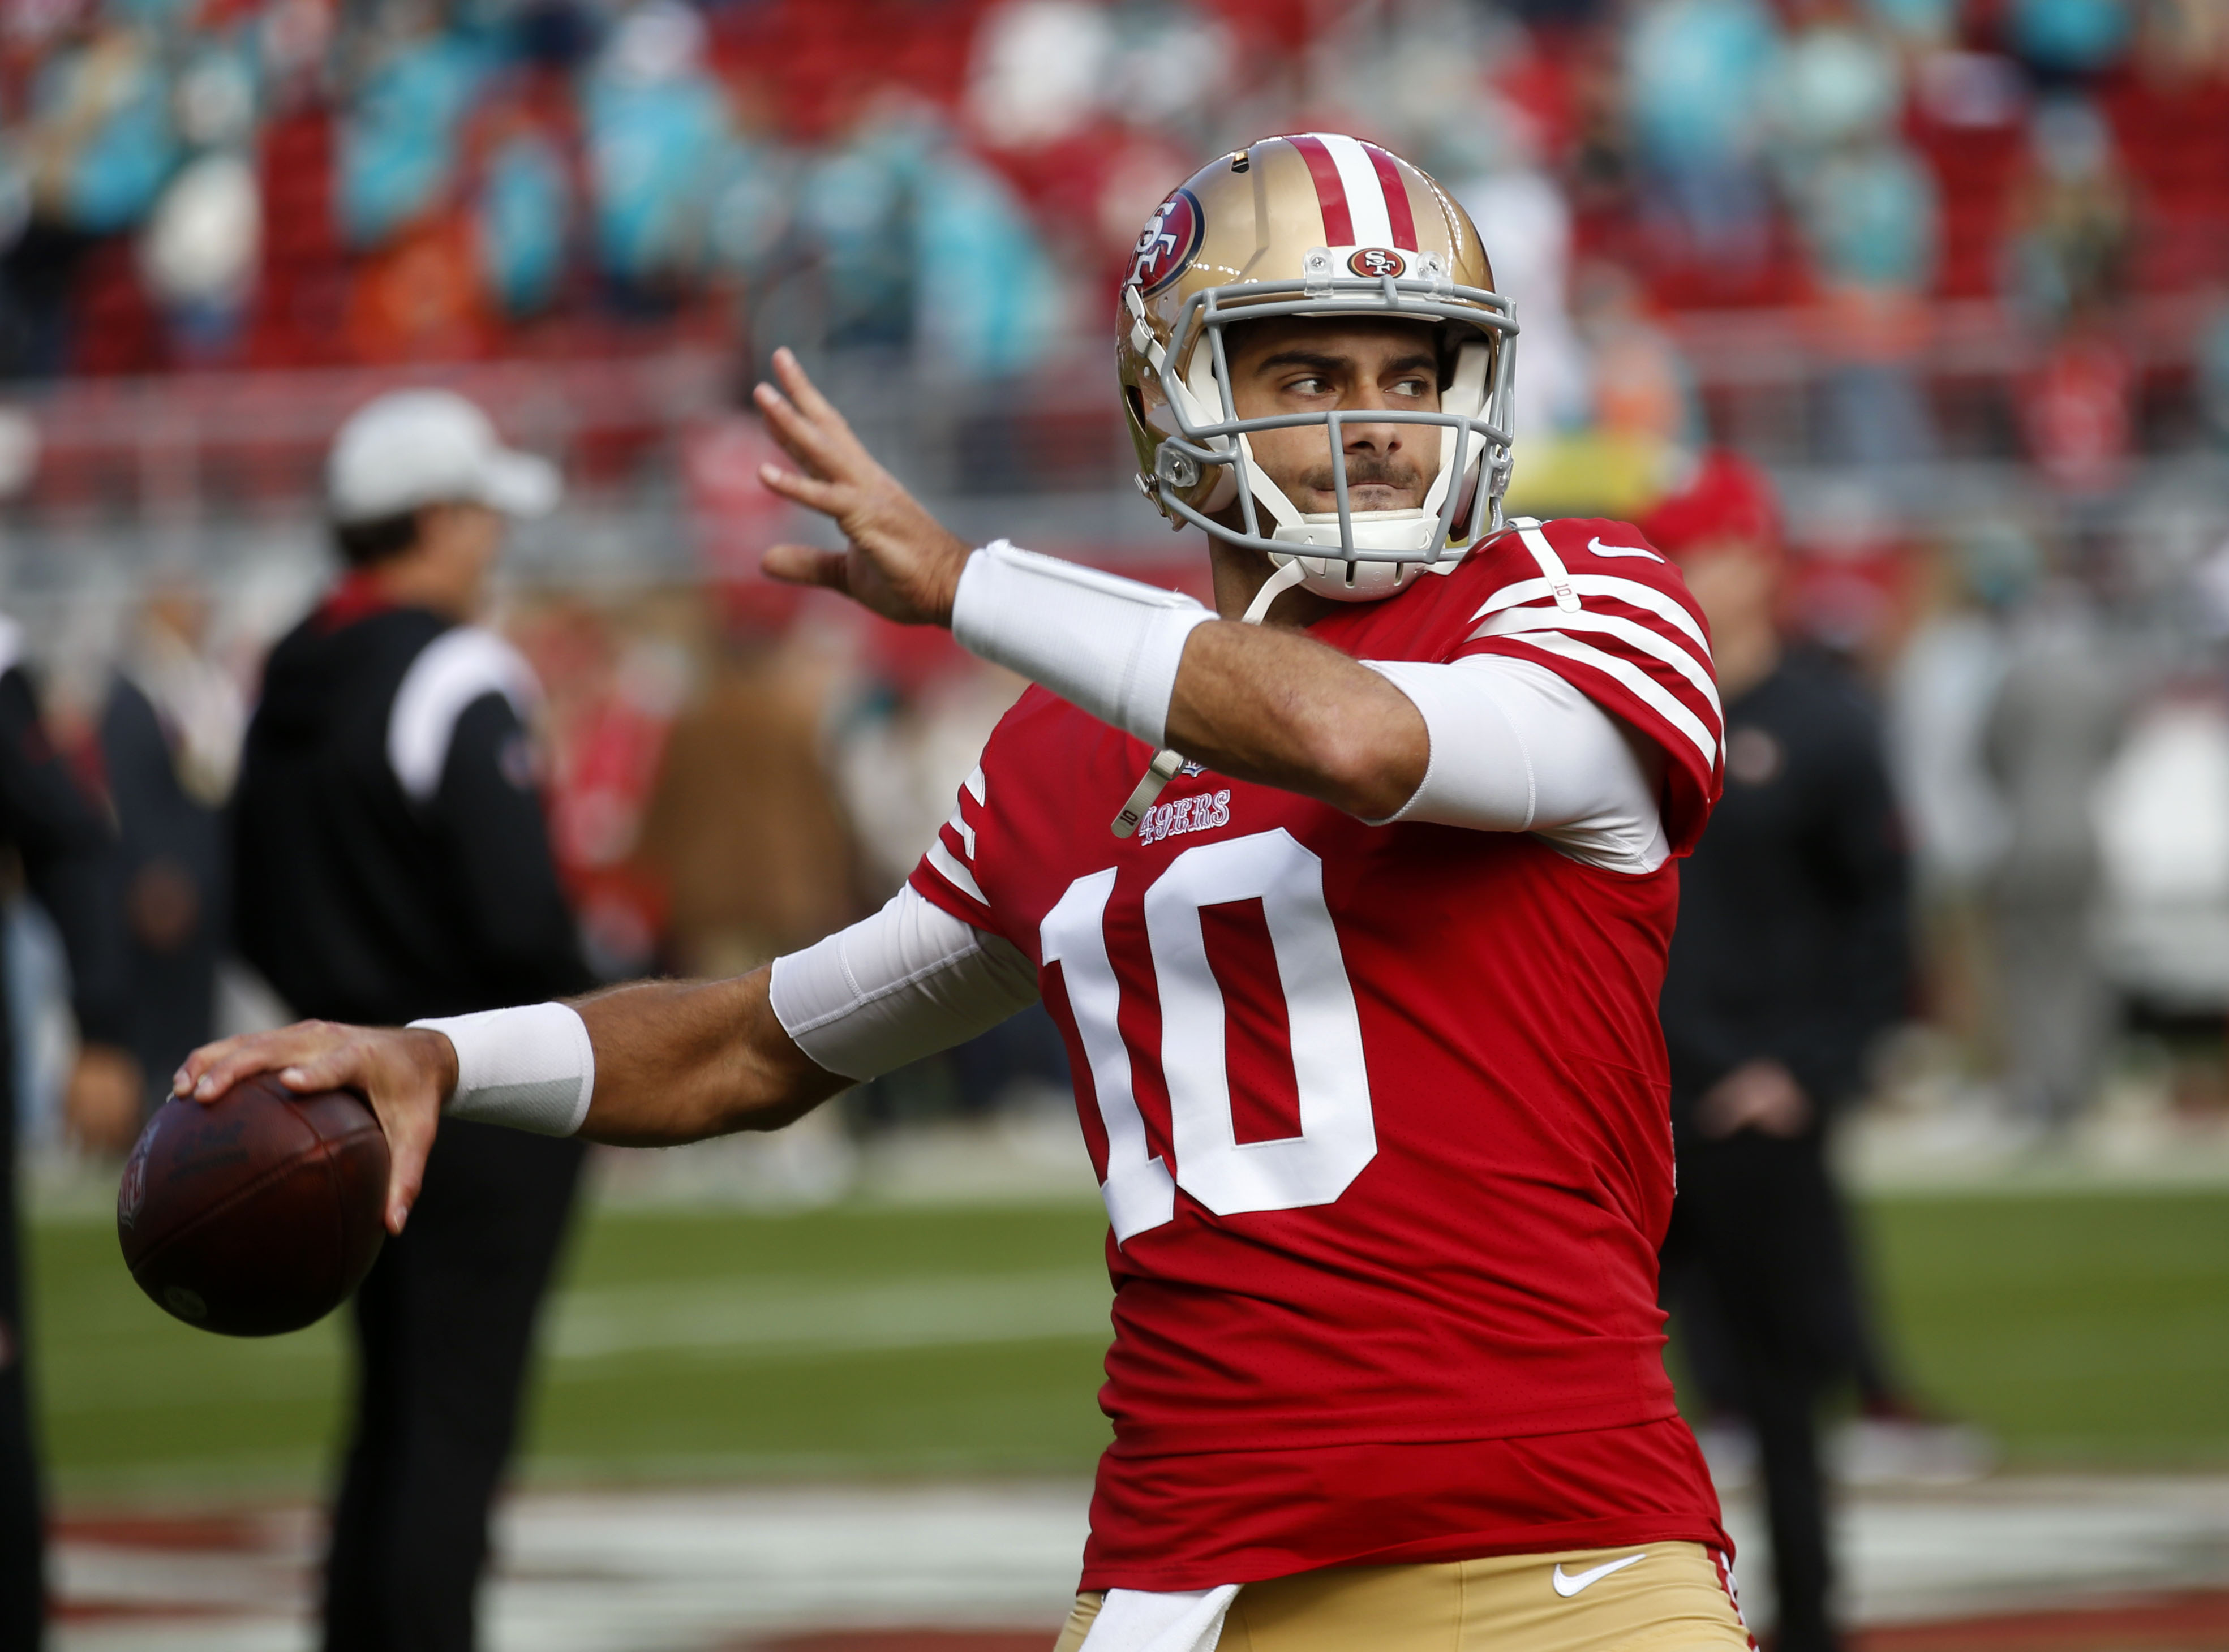 Quarterback Jimmy Garoppolo of the San Francisco 49ers warms up ahead of the game against the Miami Dolphins at Levis Stadium in Santa Clara, California, December 4, 2022. /CFP